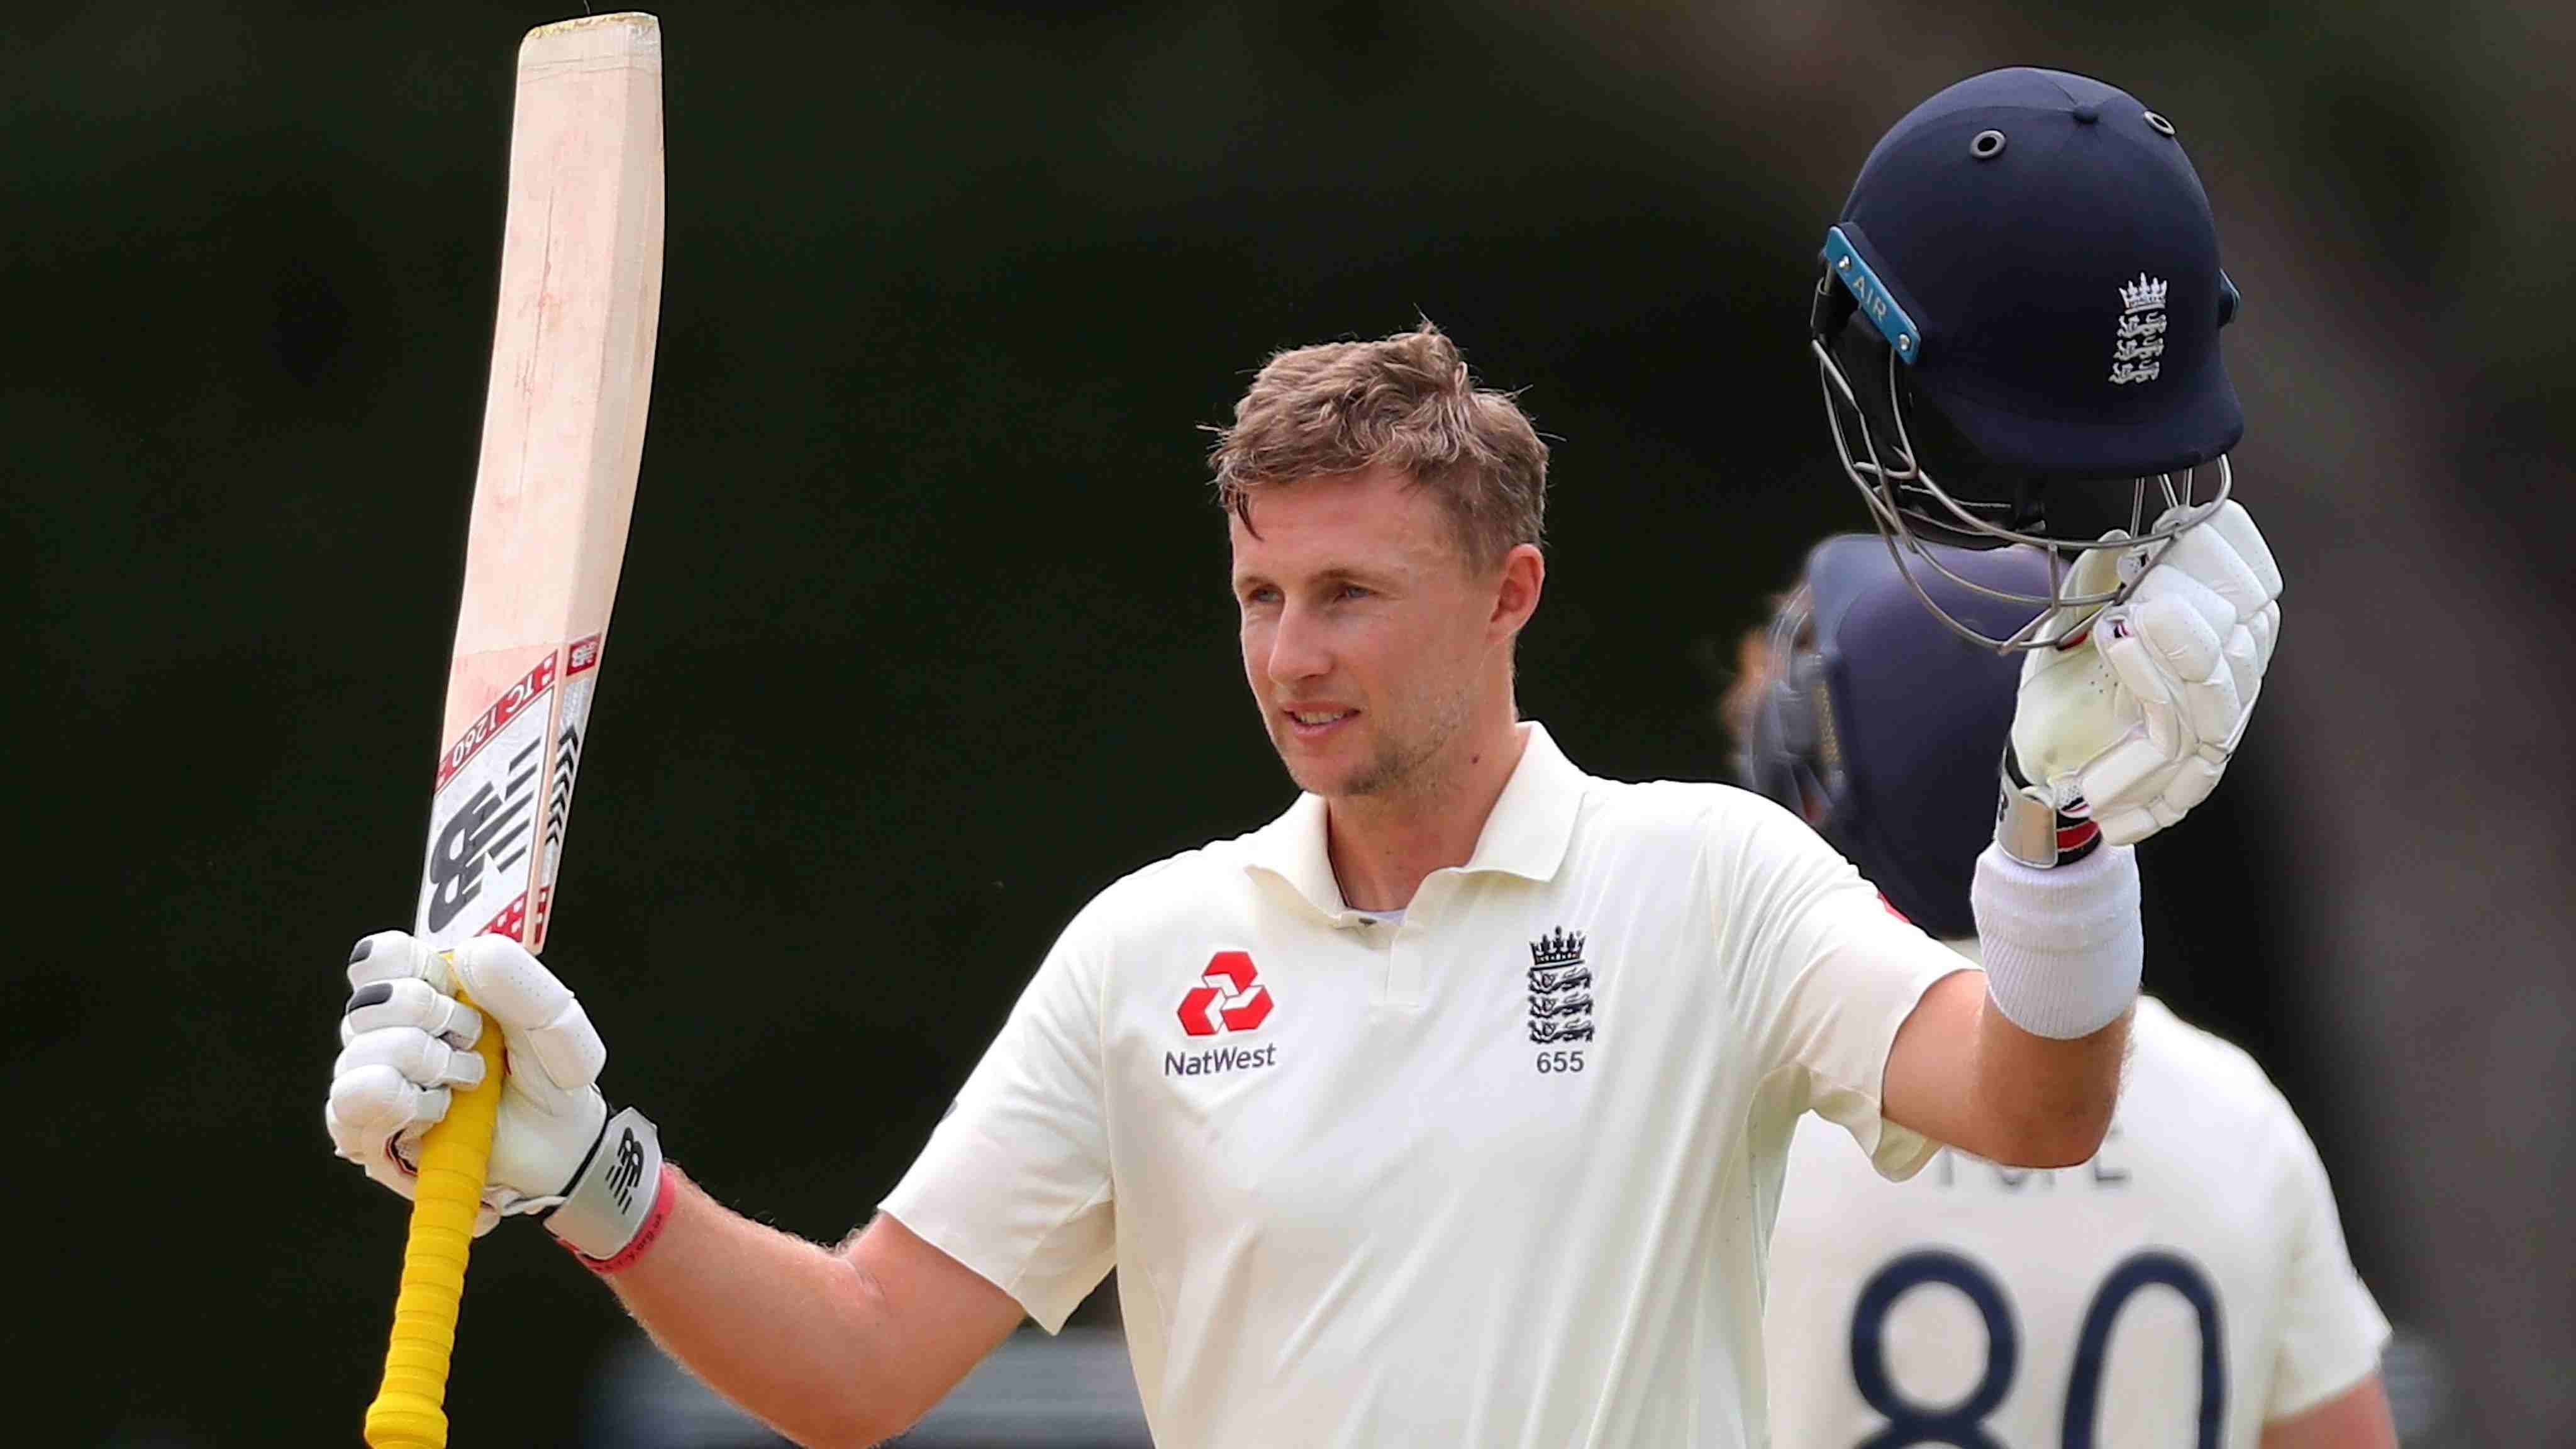 We can best prepare ourselves for Ashes by winning matches against NZ & Ind: Joe Root